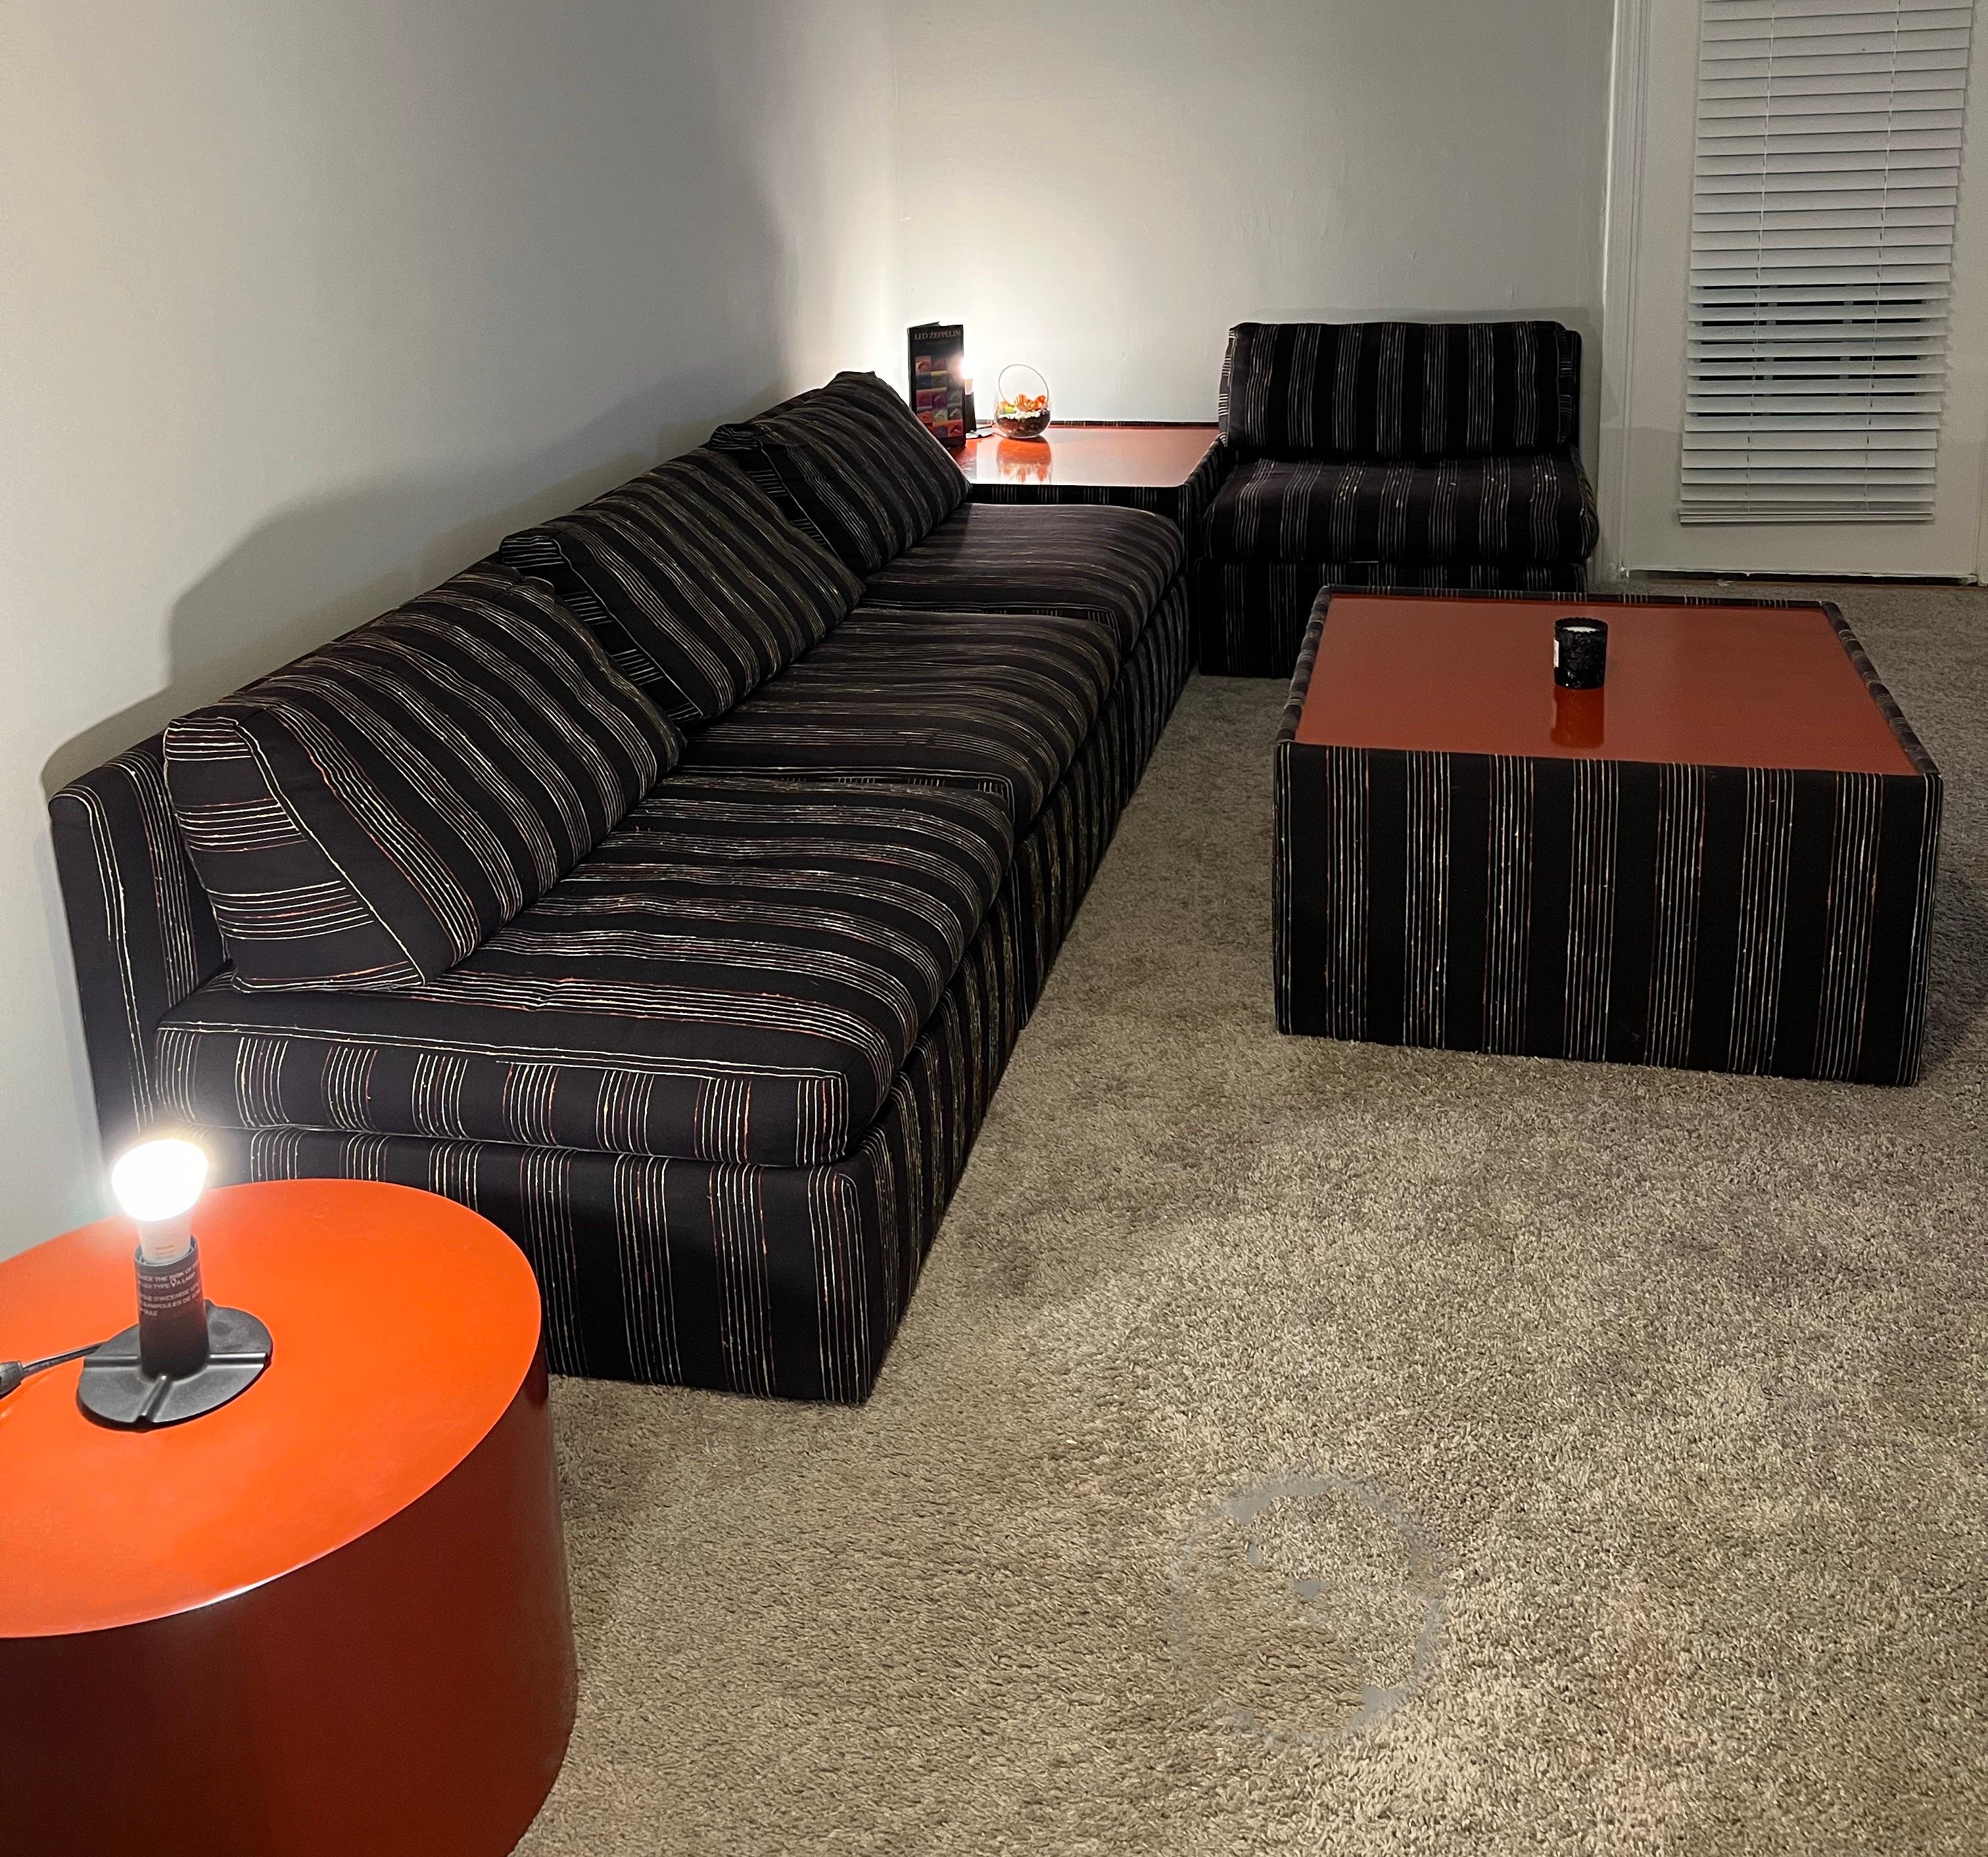 For your consideration we are excited to offer this extremely rare and original sectional pit group designed by Milo Baughman and built by Thayer Coggin. This very versatile 6 piece set consists of 4 separate seating elements and 2 laminate topped